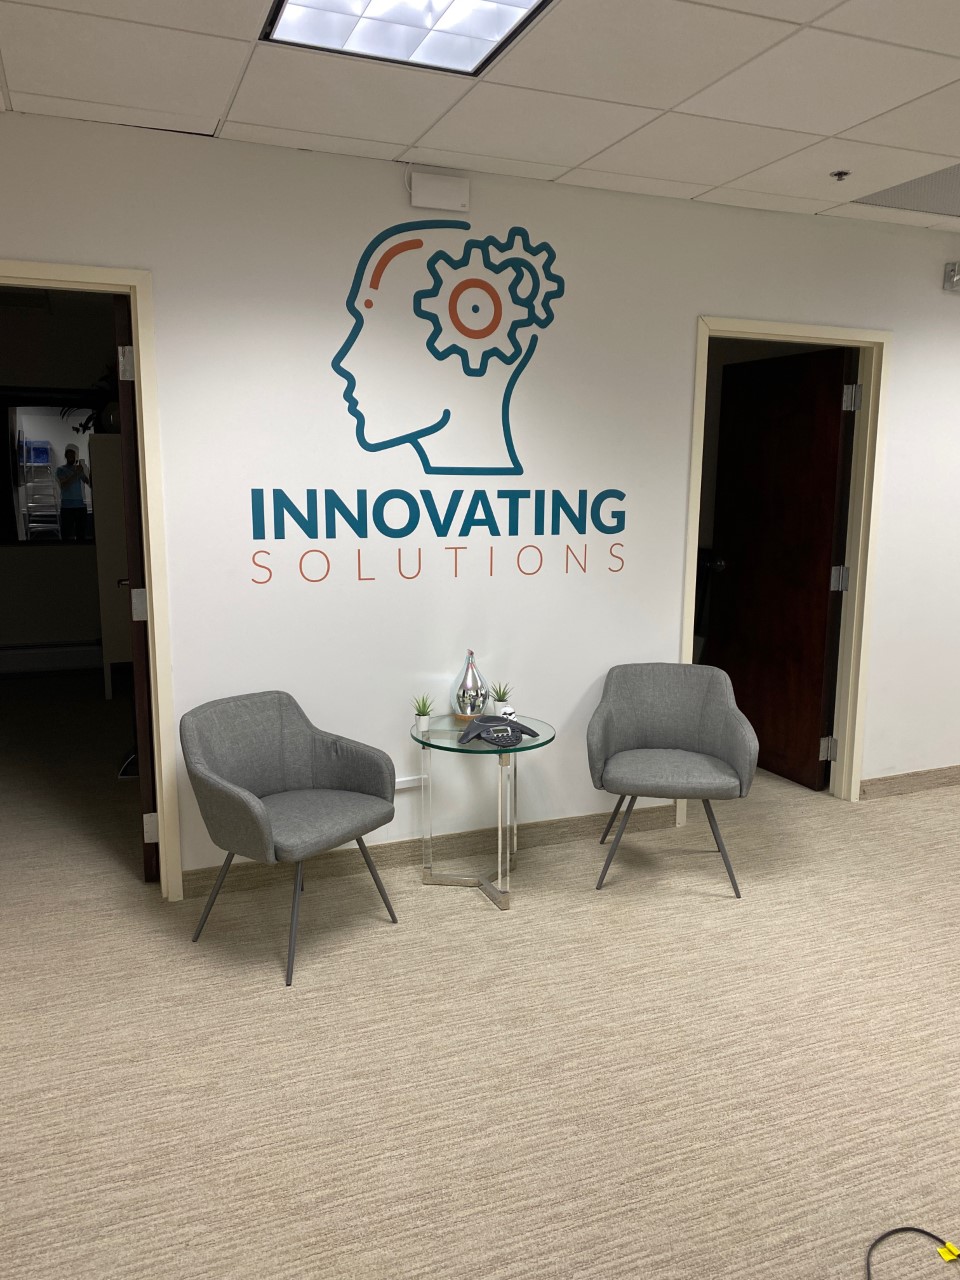 Two gray chairs and a glass table in front of a white wall with an outline of a head that says “innovating solutions”.